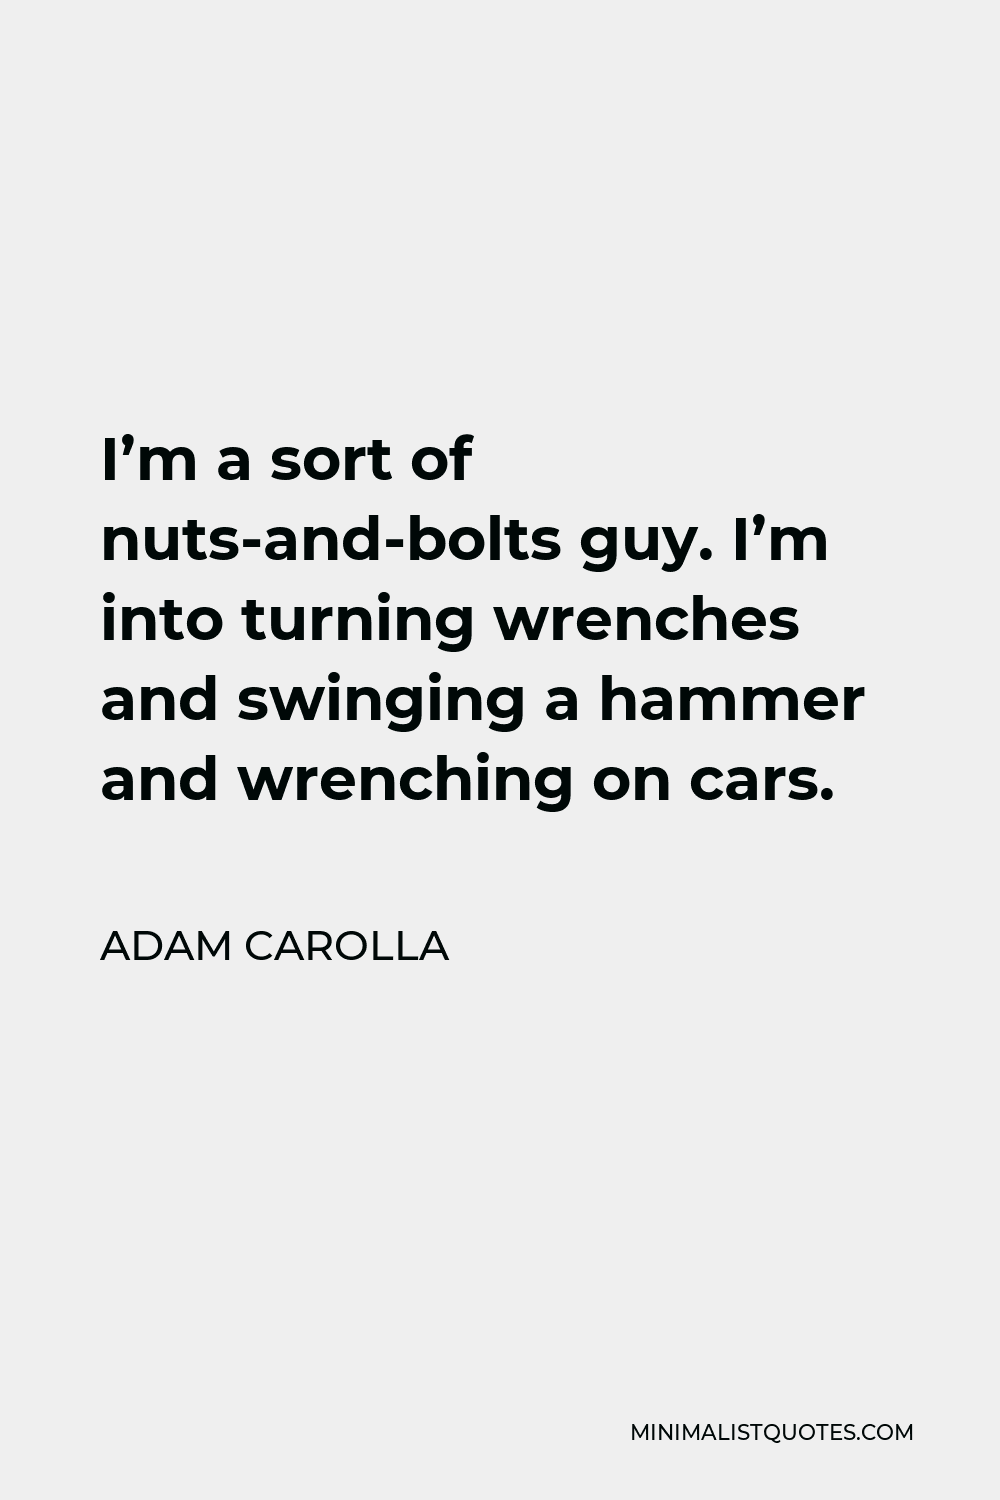 Adam Carolla Quote - I’m a sort of nuts-and-bolts guy. I’m into turning wrenches and swinging a hammer and wrenching on cars.